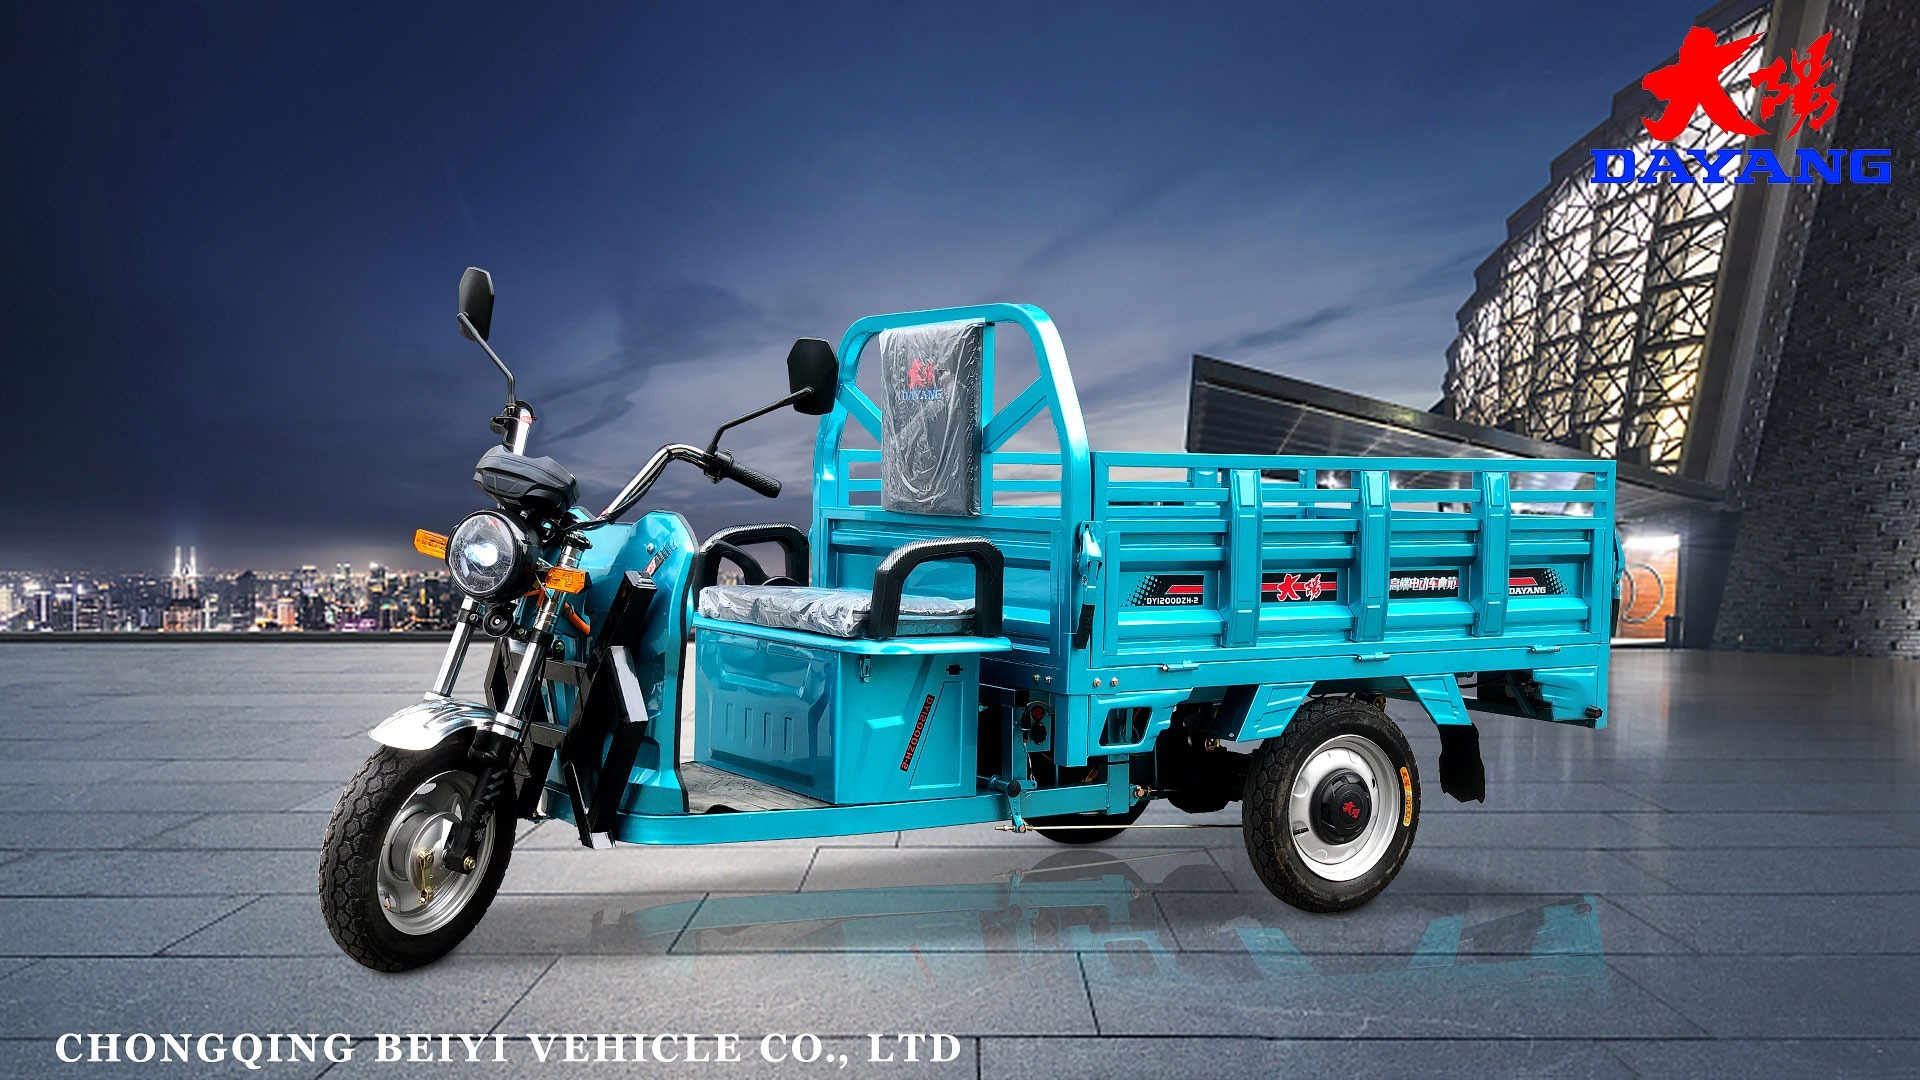 How much potential does the electric tricycle industry have?